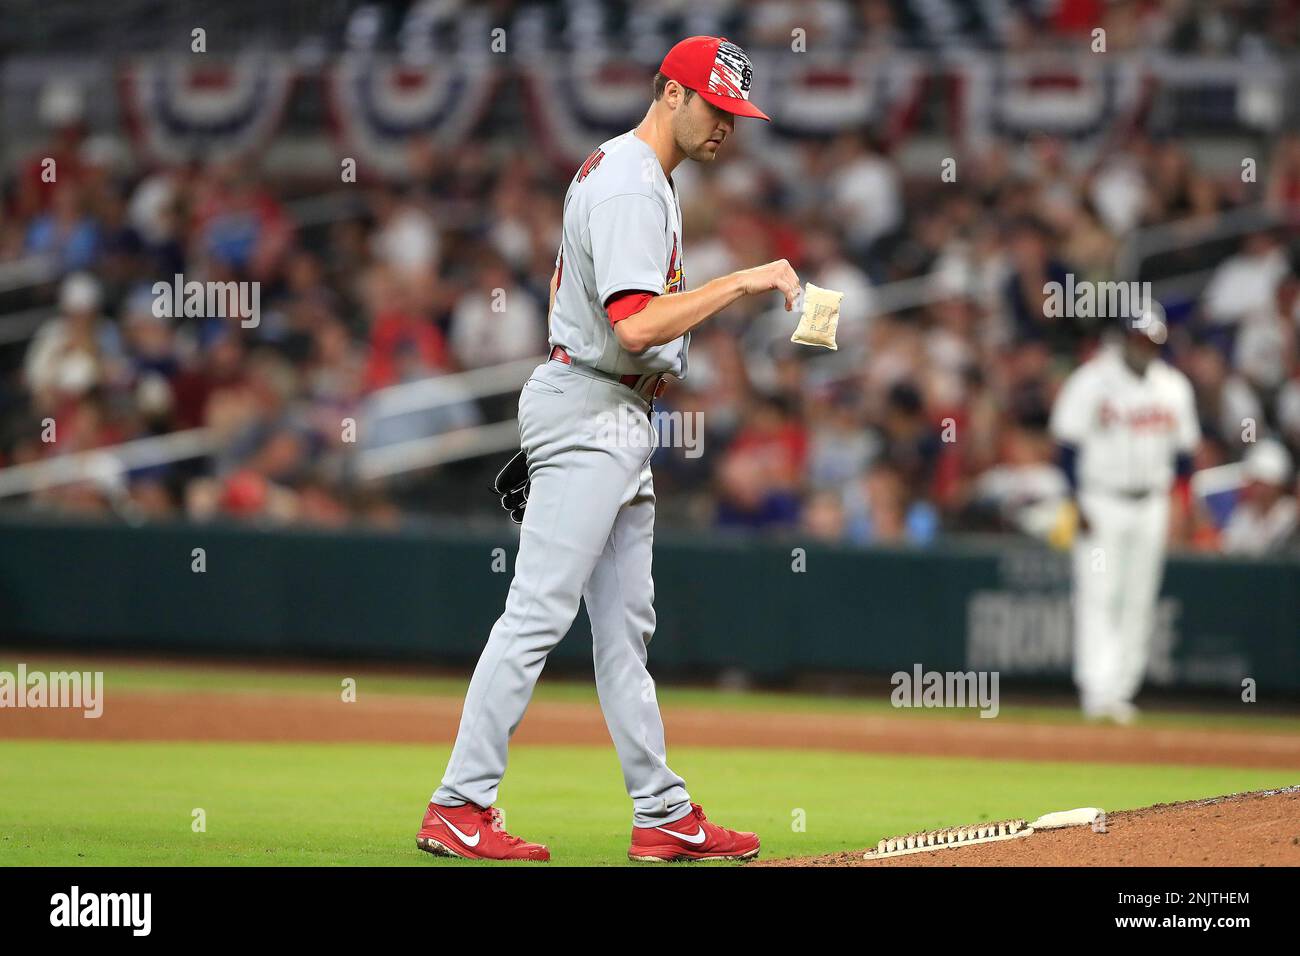 ATLANTA, GA - JULY 04: James Naile (68) of the St. Louis Cardinals goes to  the rosin bag before taking the mound during the Monday evening MLB game  between the Atlanta Braves